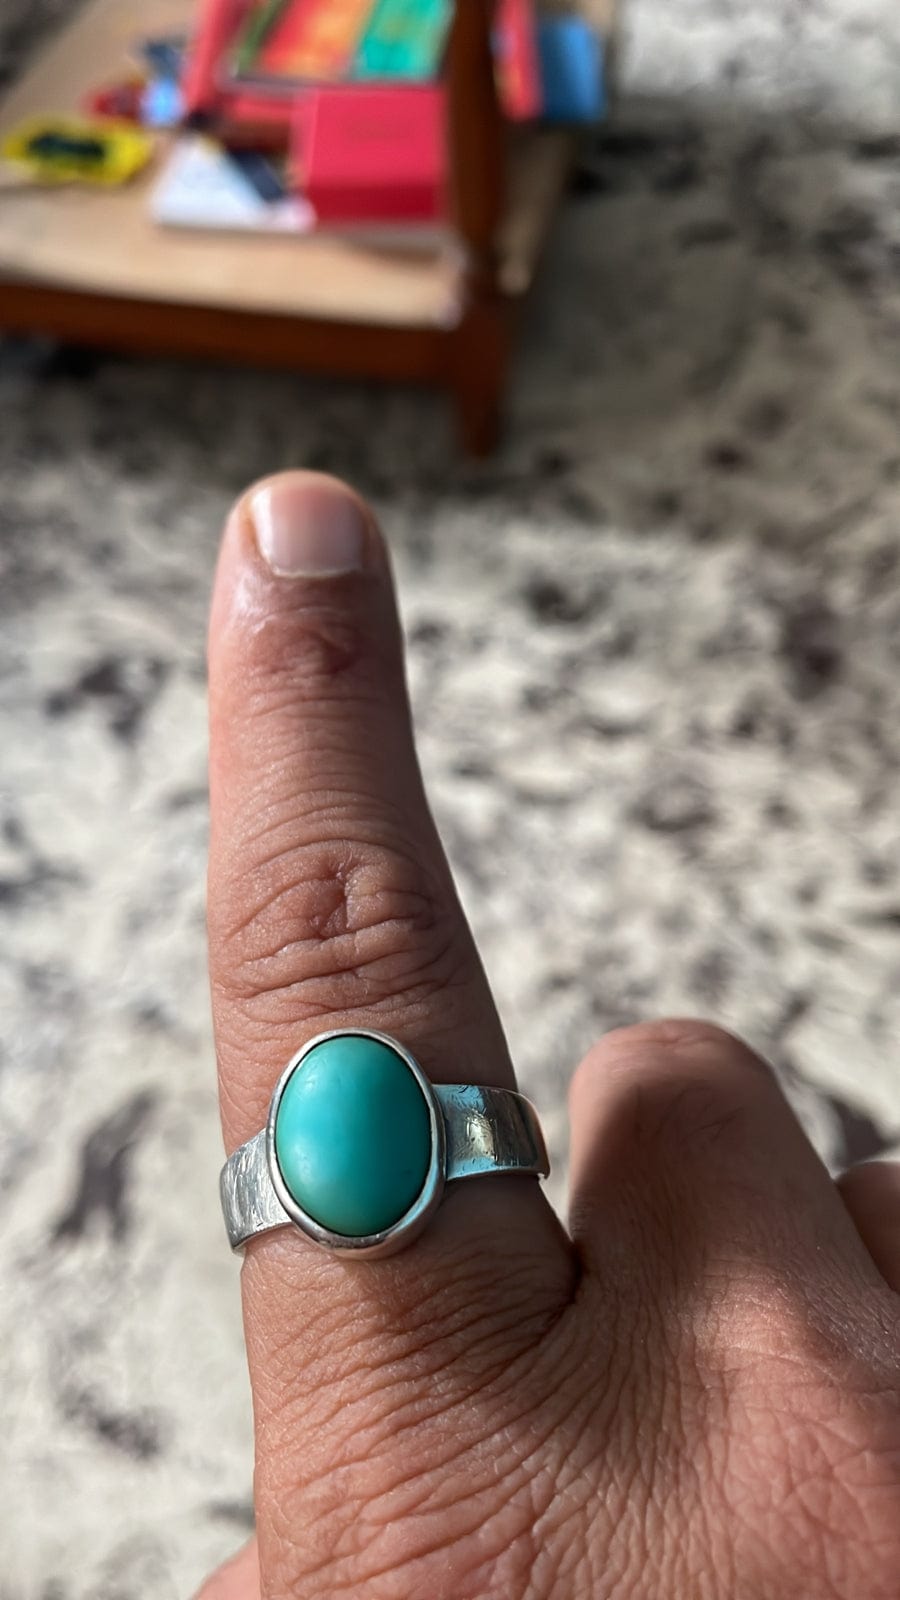 Buy Copper Turquoise Jewelry Natural Gemstone Ring Statement Online in India  - Etsy | Natural gemstone ring, Gemstone rings, Delicate silver rings